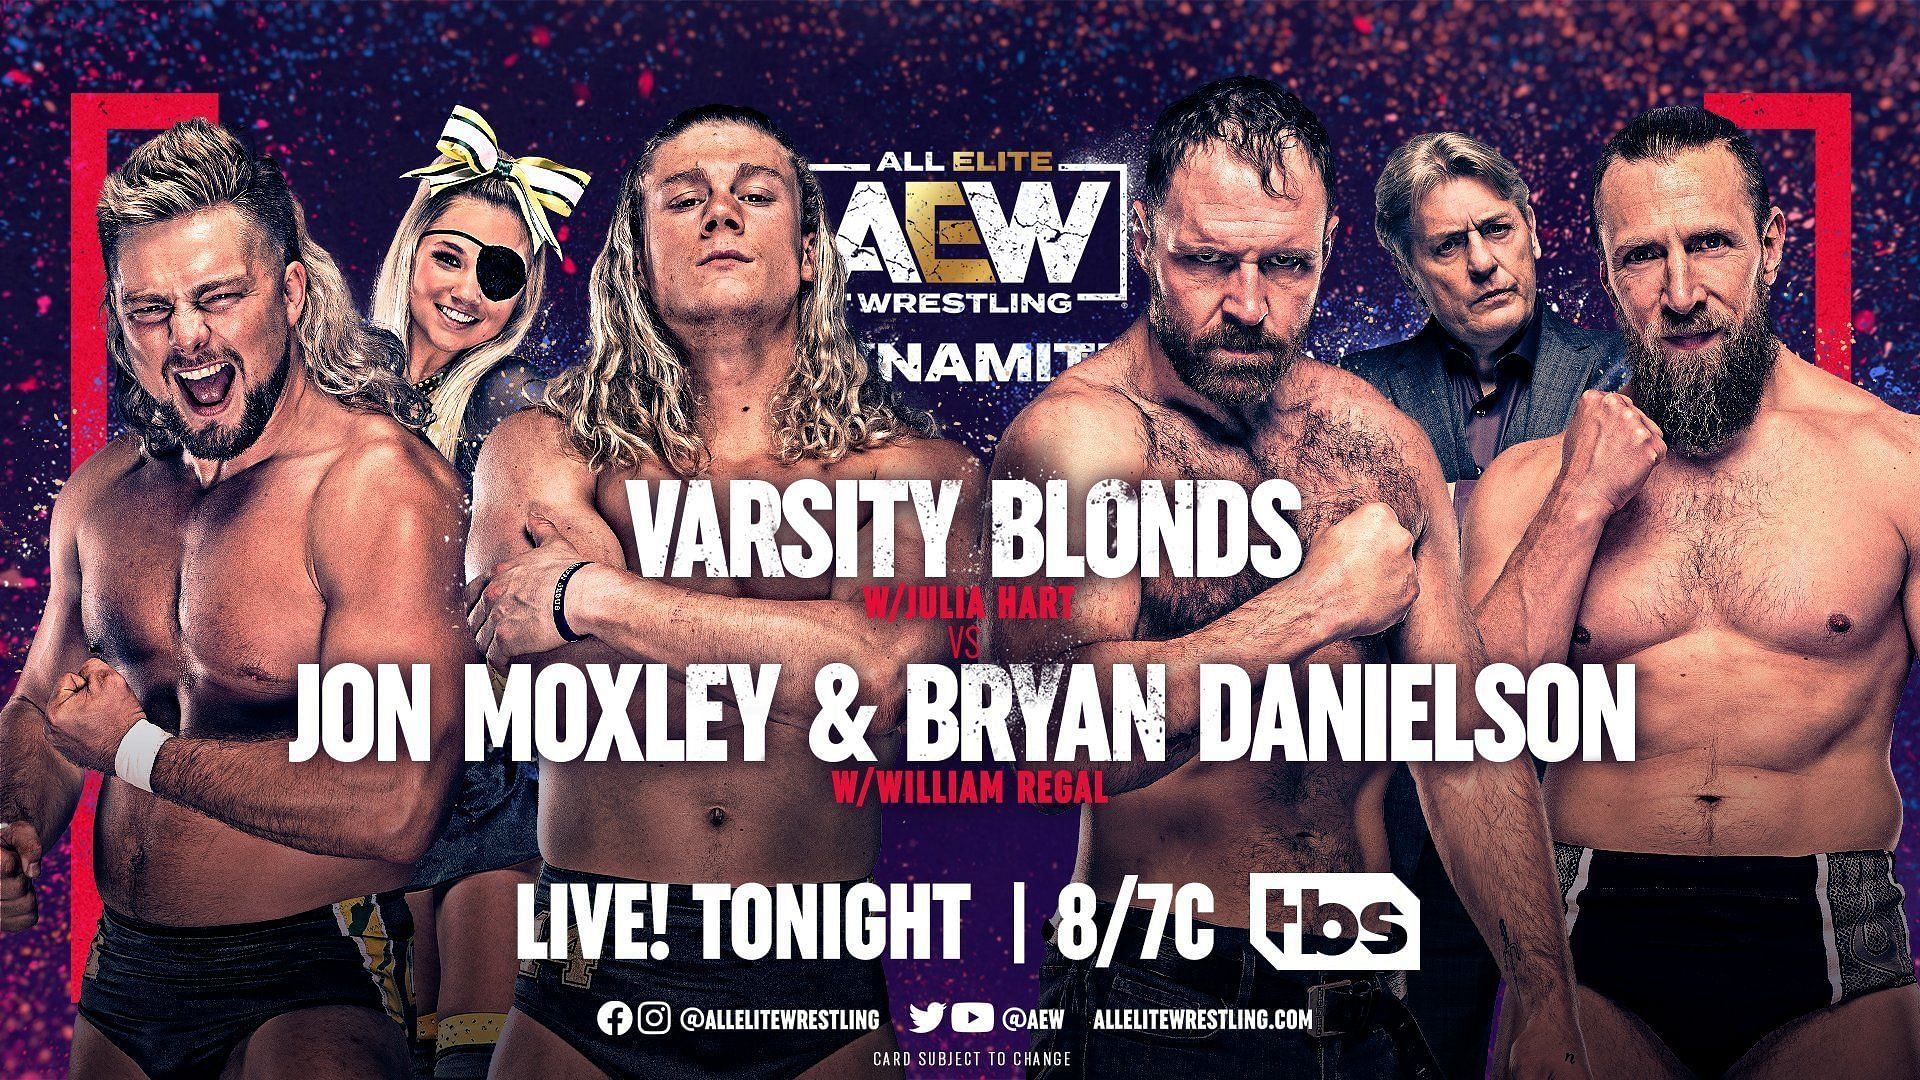 Could Moxley and Danielson look to recruit one of the Varsity Blonds?